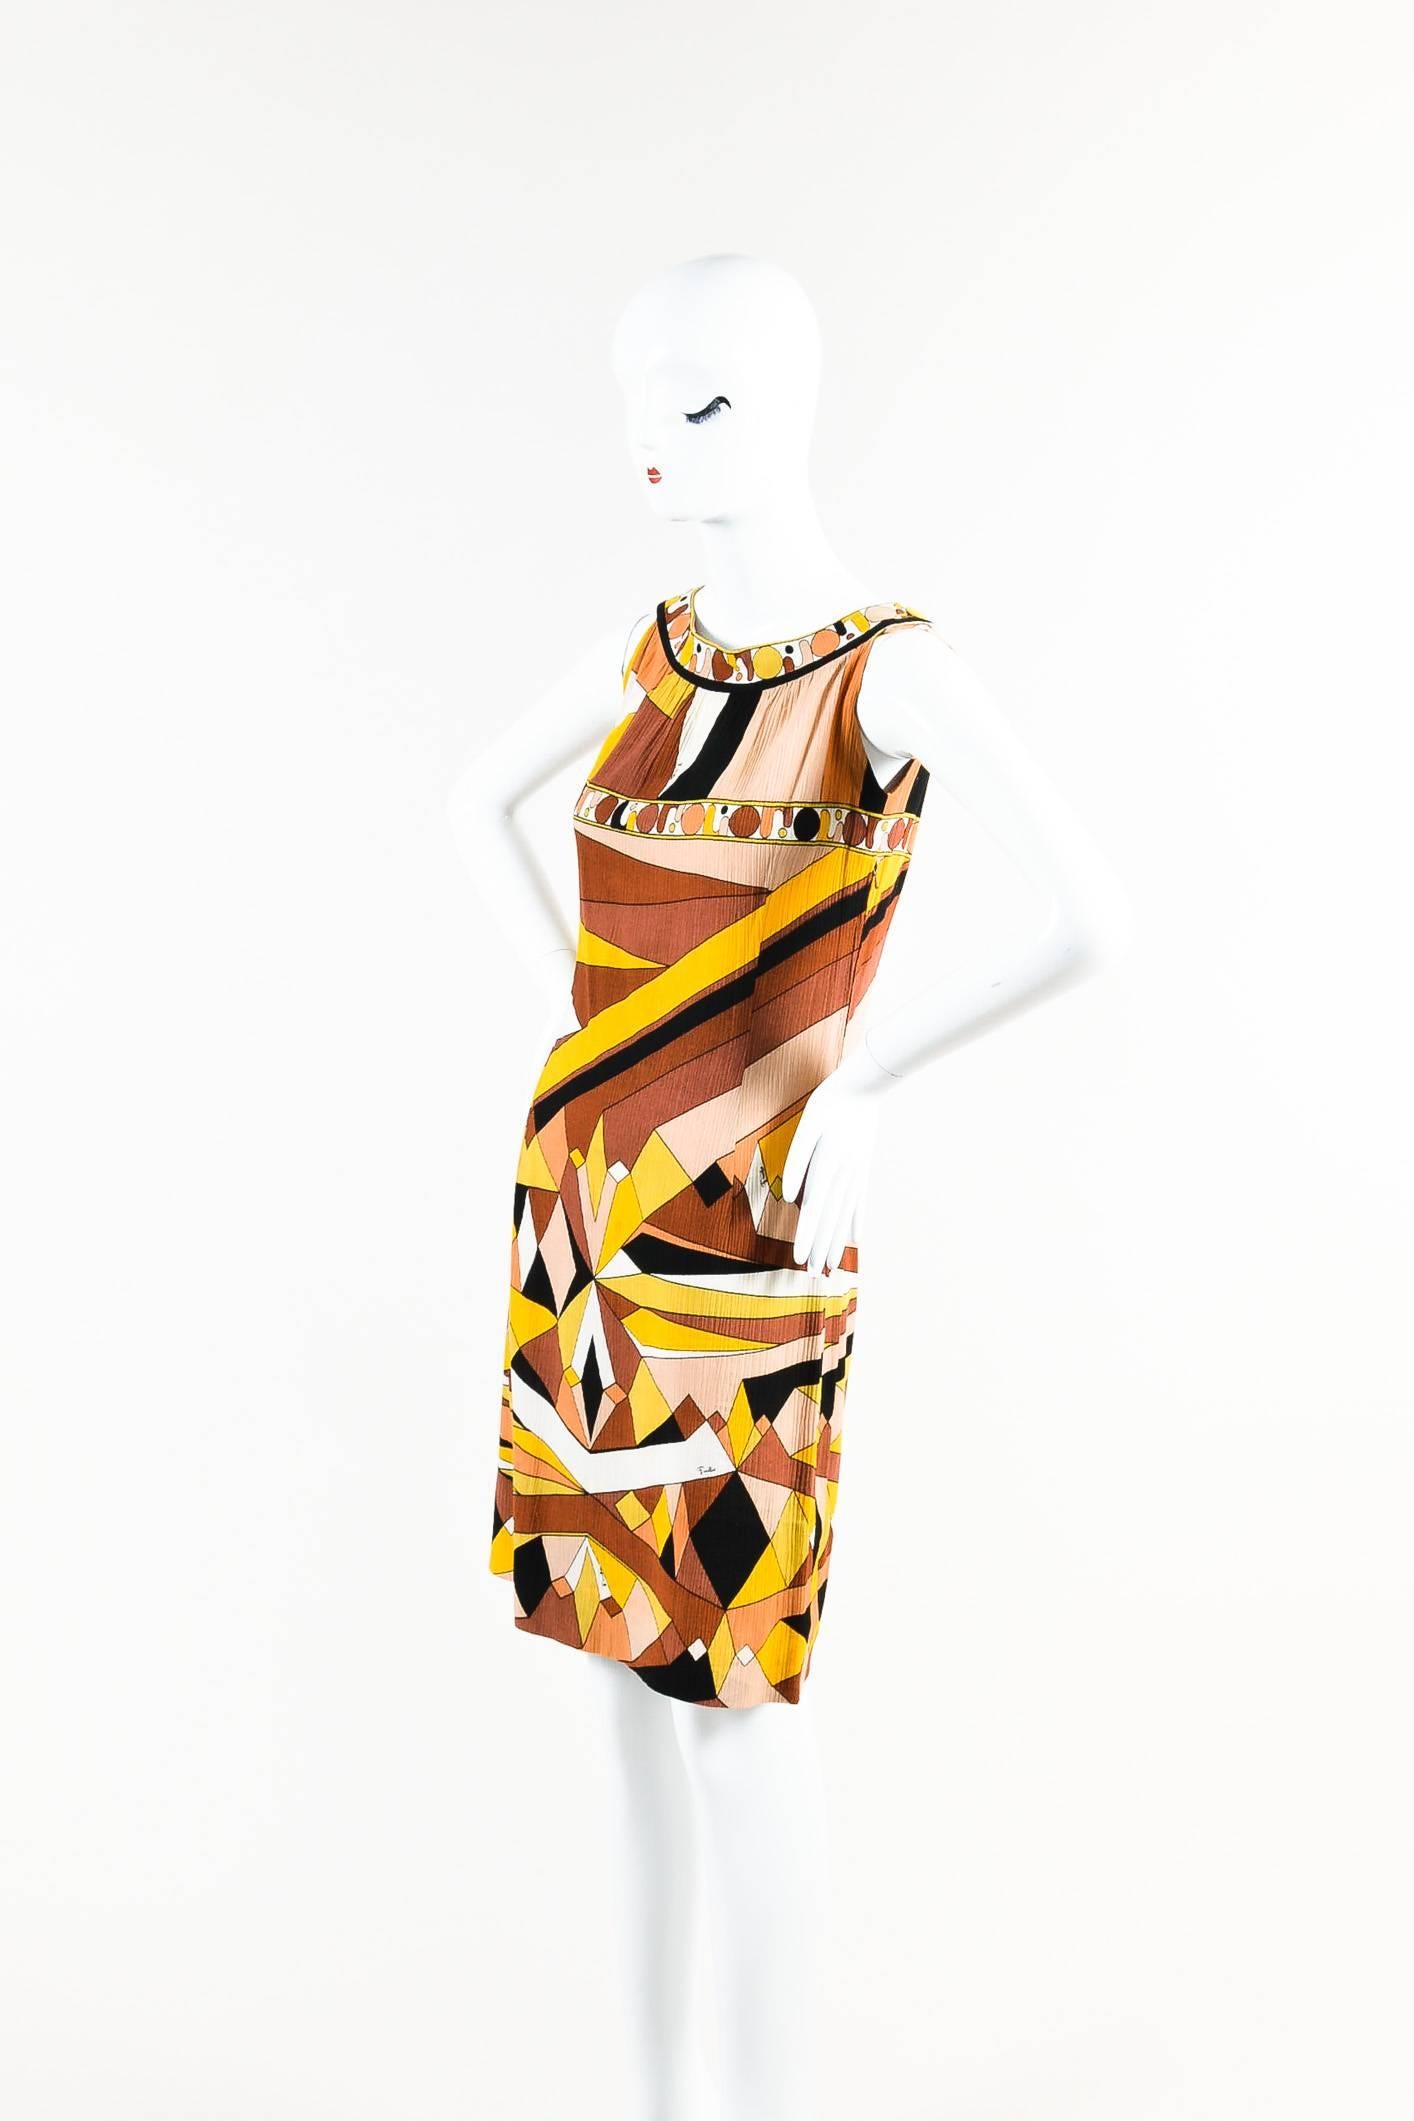 This vintage Emilio Pucci dress was gifted from Pucci himself and features a textured crepe cotton in a sleeveless, shift style. Boat neckline. Button details at tops of shoulders/straps. Signature abstract Pucci pattern throughout. Hidden side